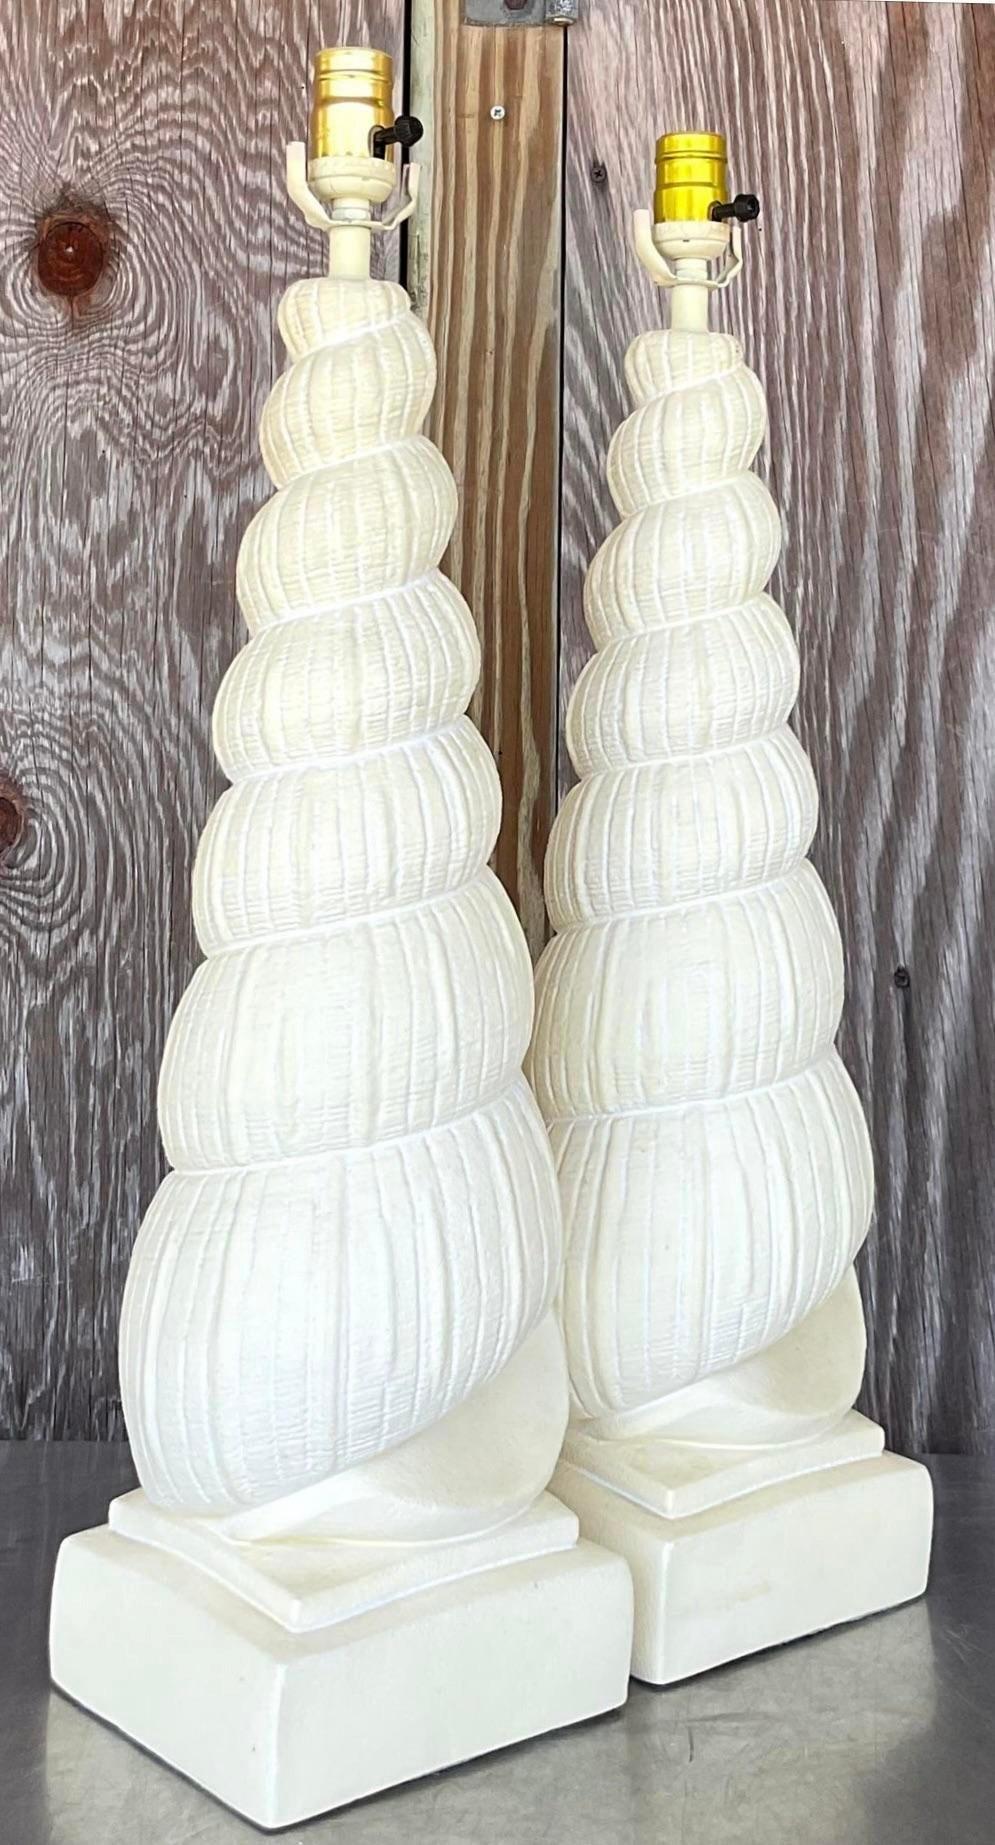 American Vintage Costal Plaster Tall Shell Lamps - a Pair For Sale